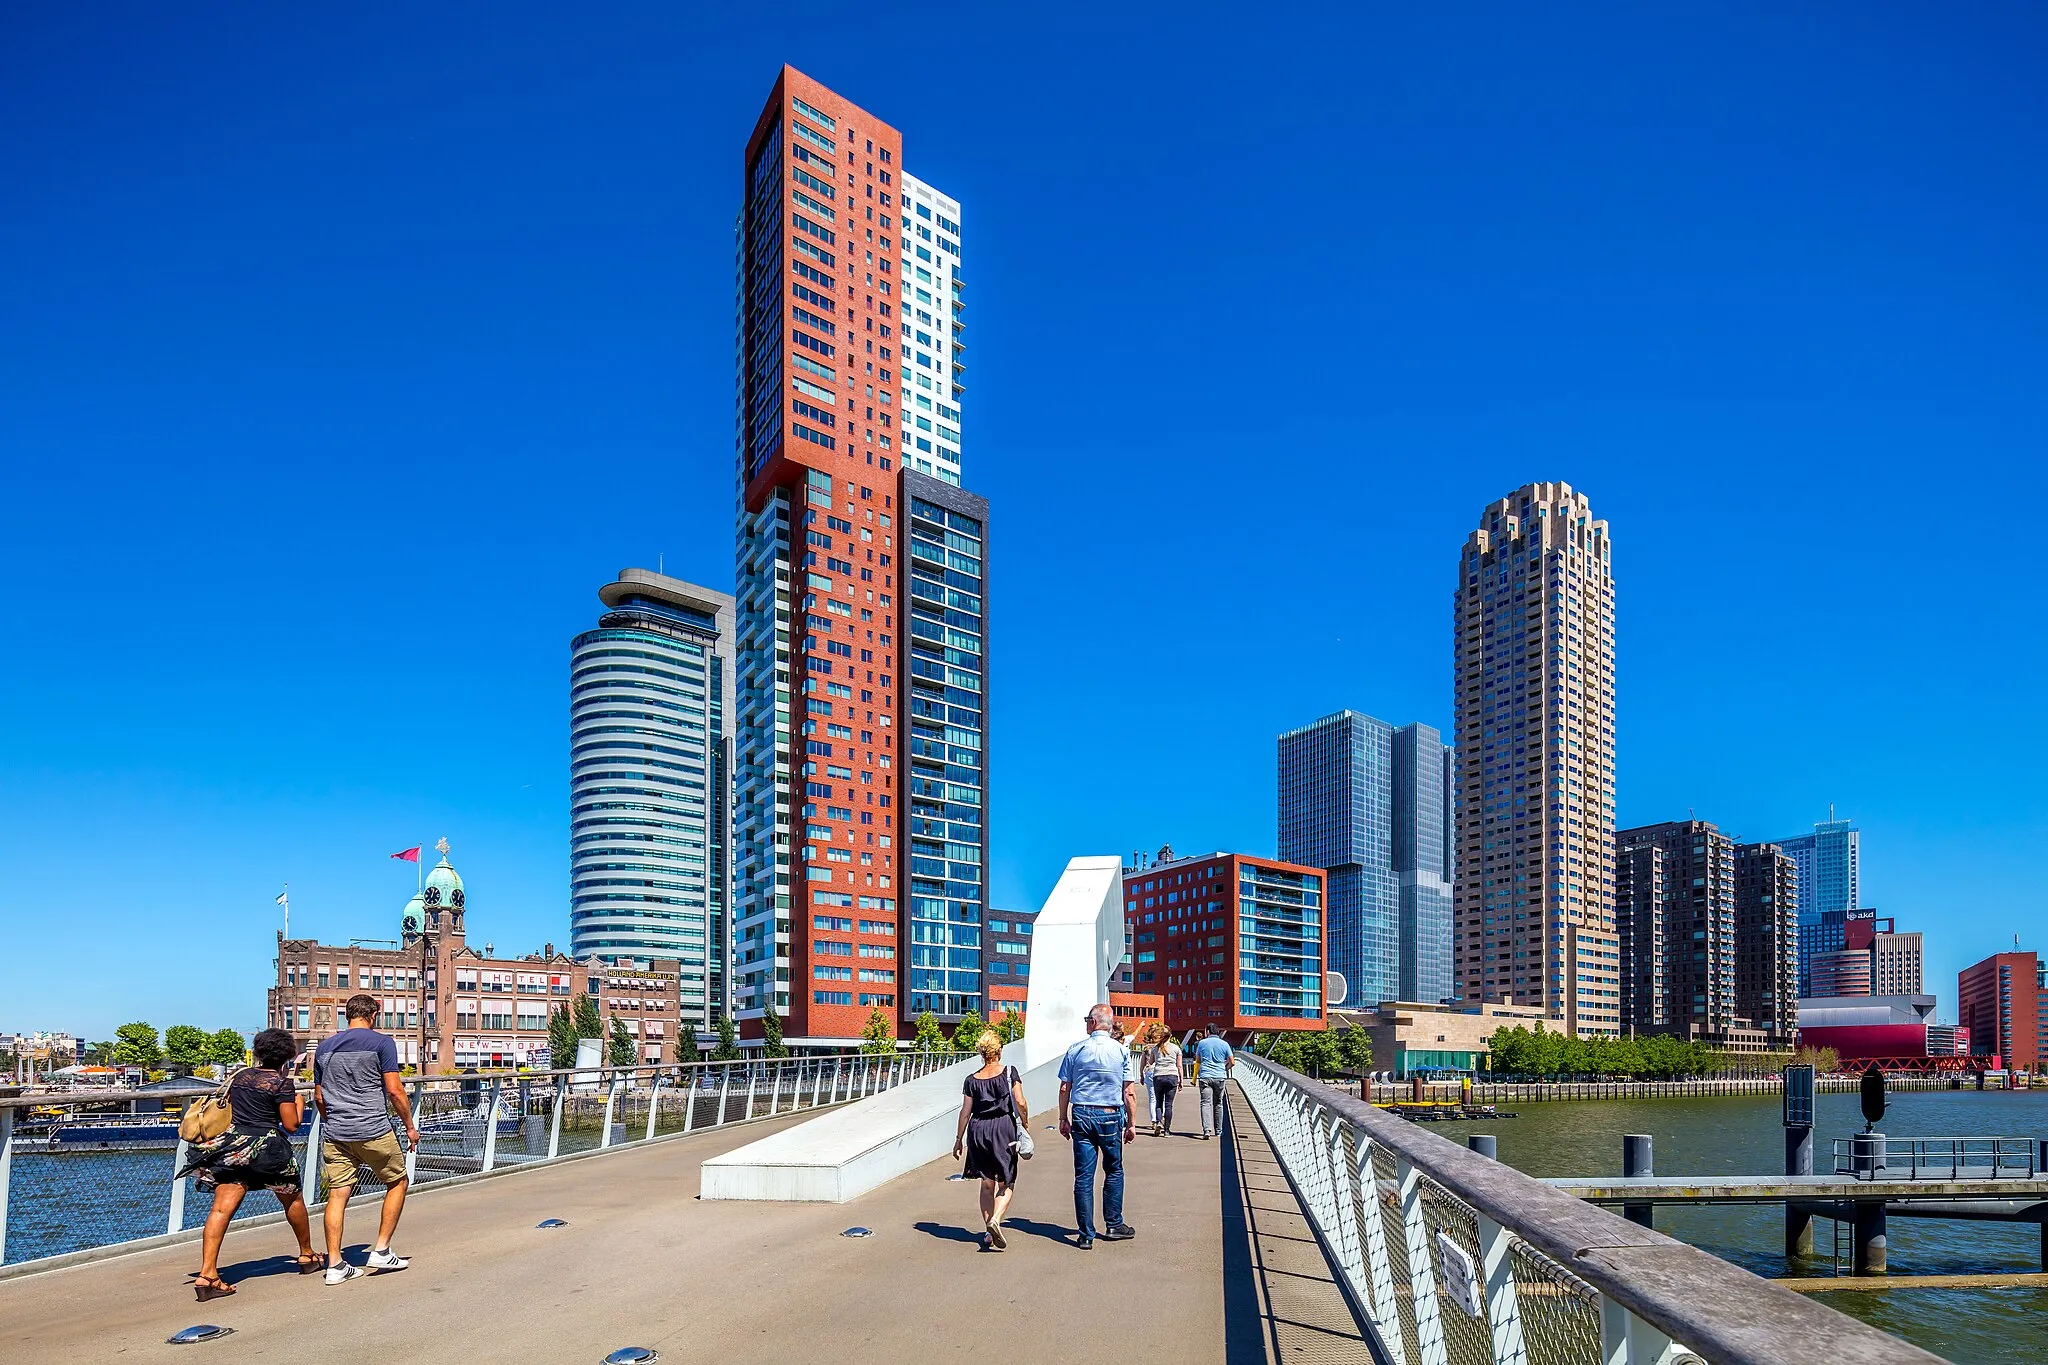 Photo showing: Skyline at Kop Van Zuid (Wilhelminapier), Rotterdam (07/2018) - Human picture: (1 body / 1 lens / 1 human = 1 picture ) 0% AI... ;- ) ...
Following vandalization (Rotterdam) of my work, final stop of this series on European cities.
My work not being respected, I definitively stop my publications in Wikimedia Commons (including definition and quality updates).
Final publication in Wikimedia Commons: https://commons.wikimedia.org/wiki/File:GraphyArchy_-_Wikipedia_00982.jpg
I also stop my GraphyArchyPocket series (before vandalization ...).

Final publication in Wikimedia Commons: https://commons.wikimedia.org/wiki/File:GraphyArchyPocket_._Wikipedia_00073.jpg